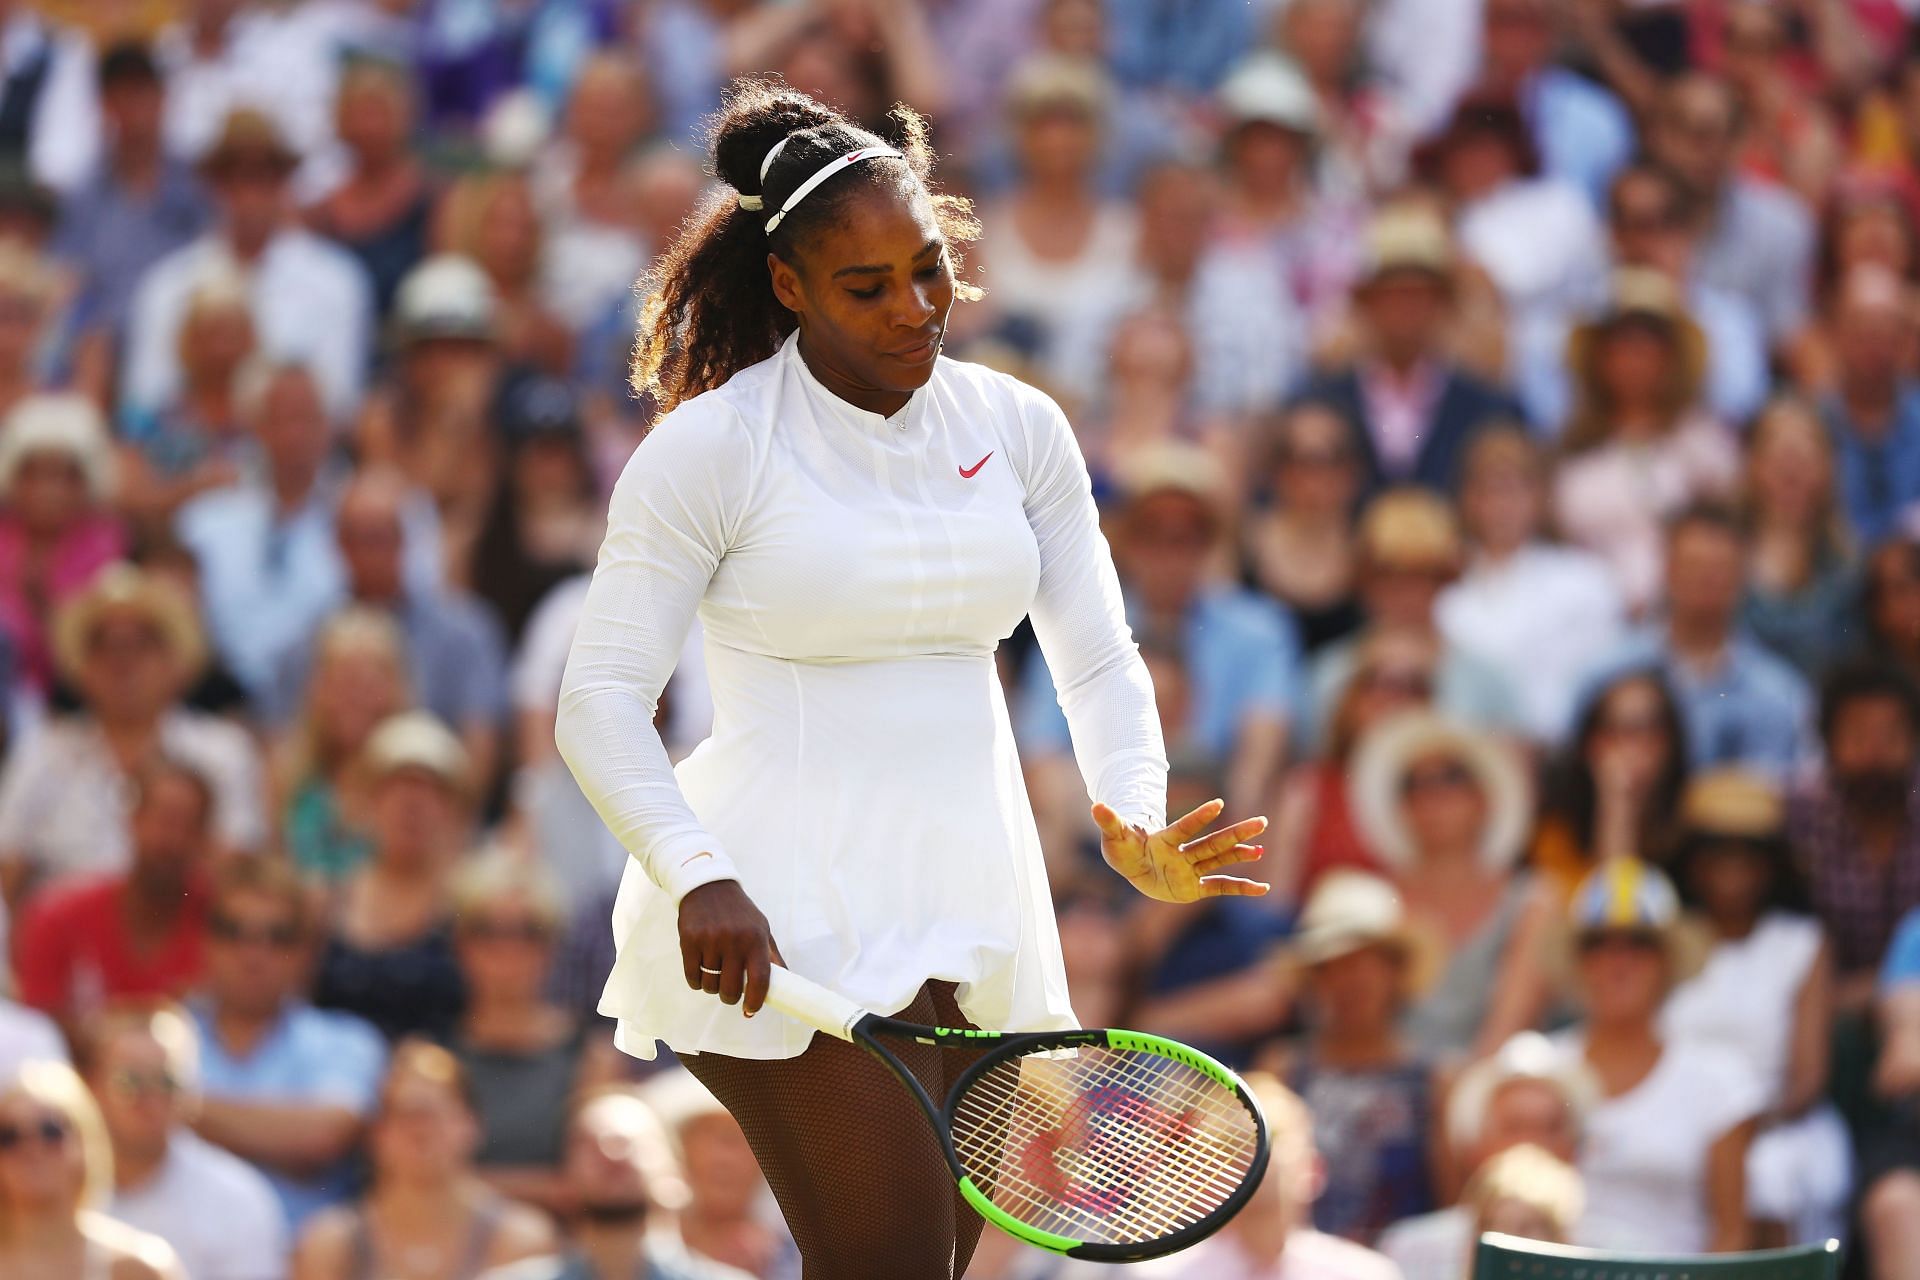 Serena Williams during the Wimbledon 2018 Championships